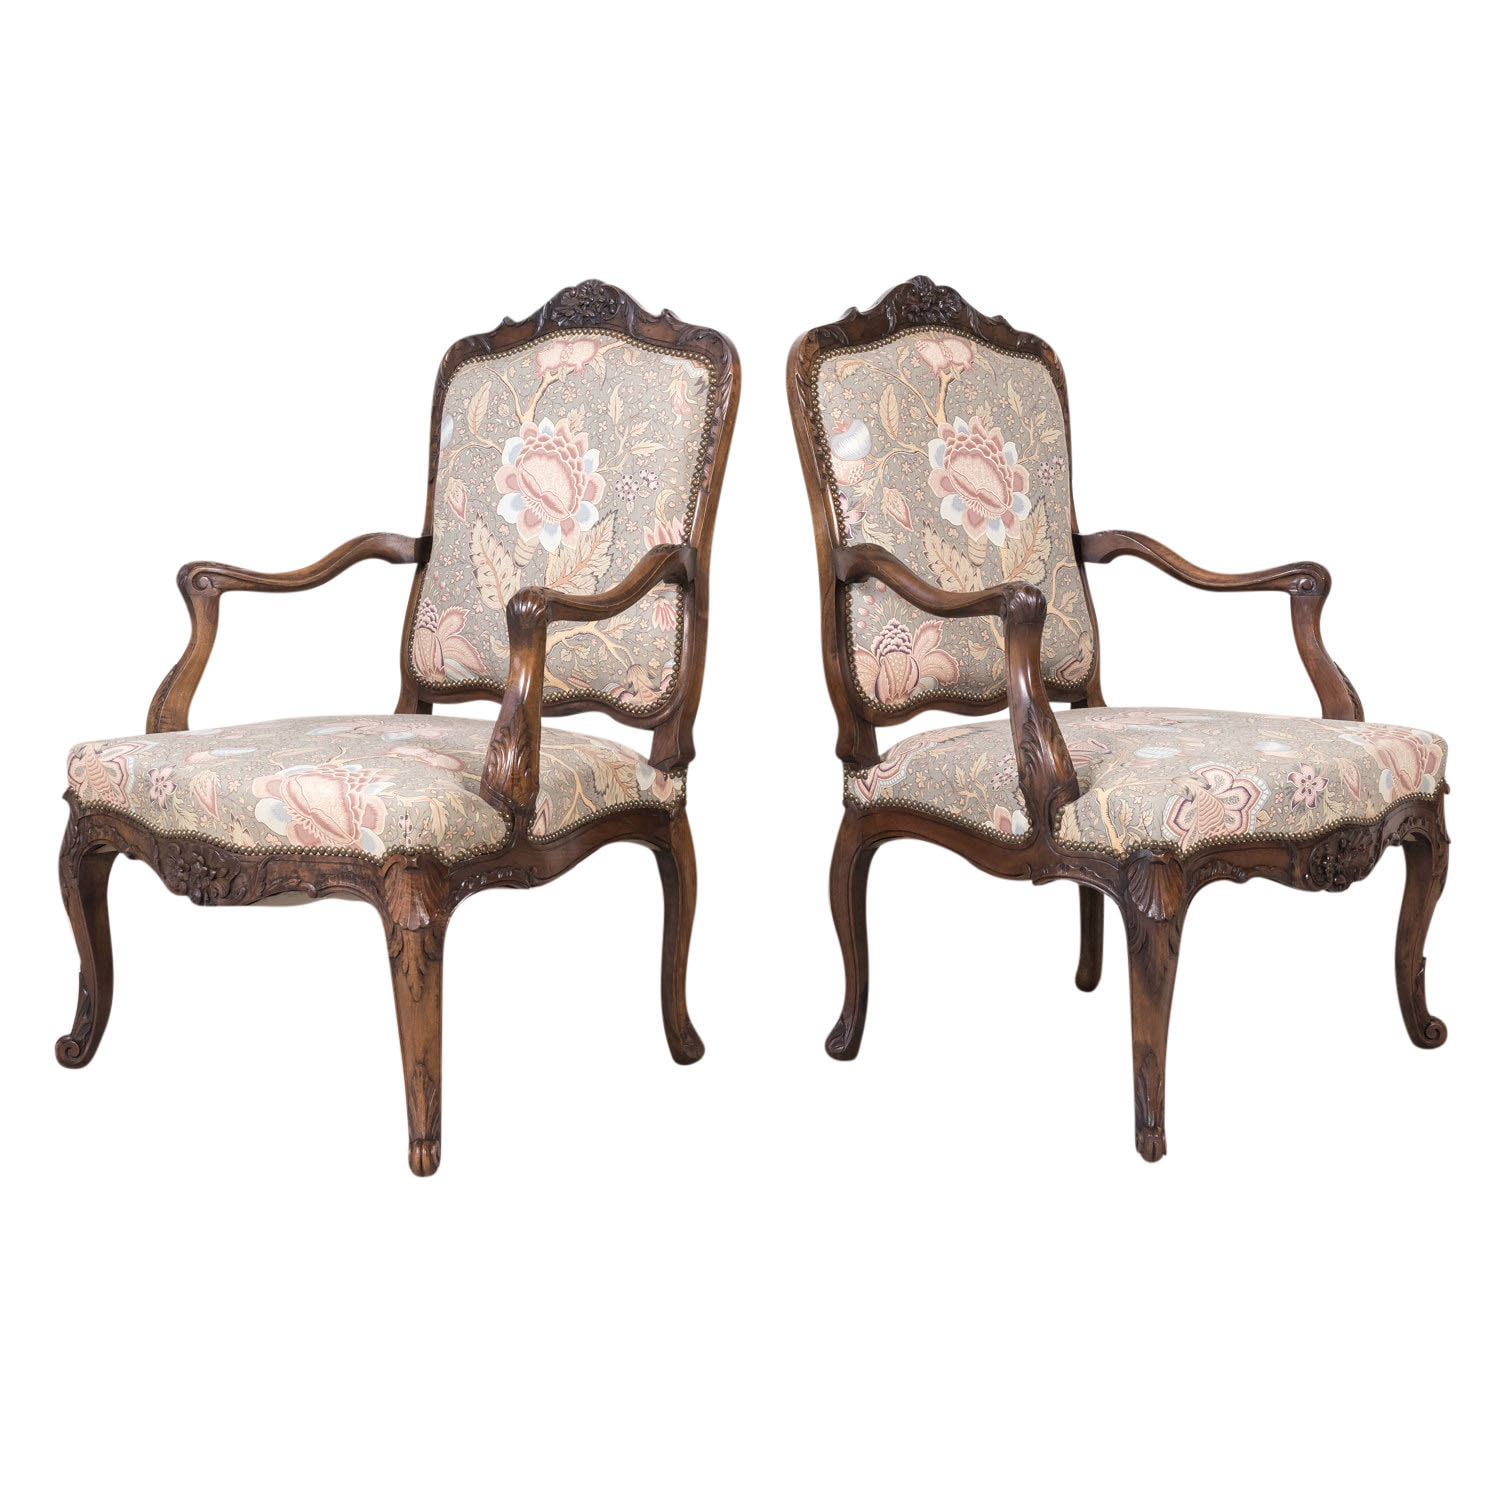 Louis XV Gray Painted Fauteuil Arm Chair, French, 18th Century